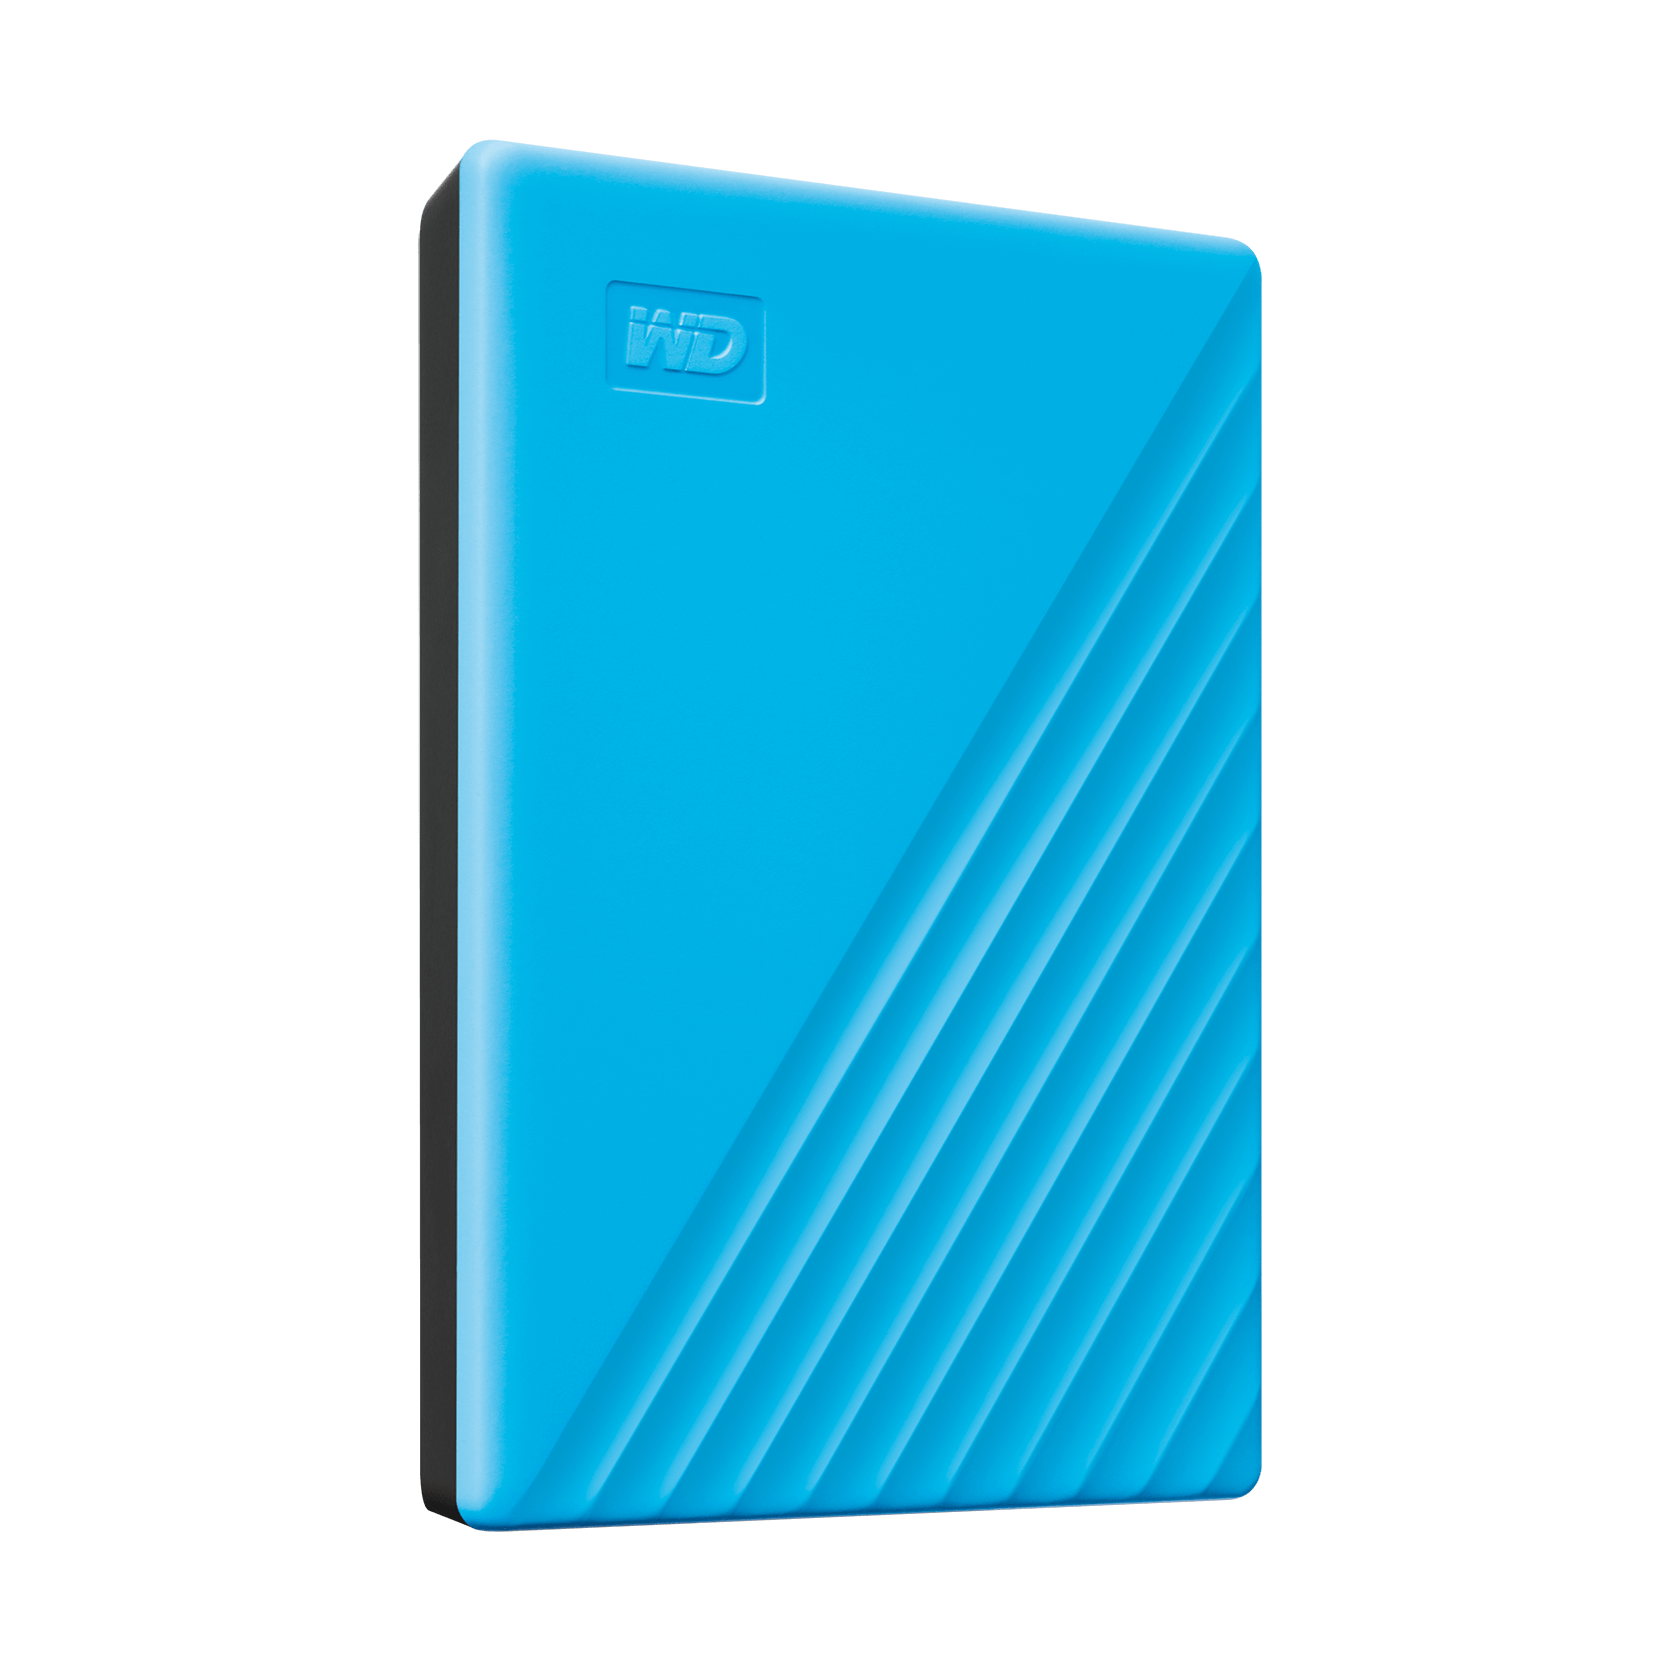 WD 2TB My Passport, Portable External Hard Drive, Blue - WDBYVG0020BBL-WESN - image 3 of 8